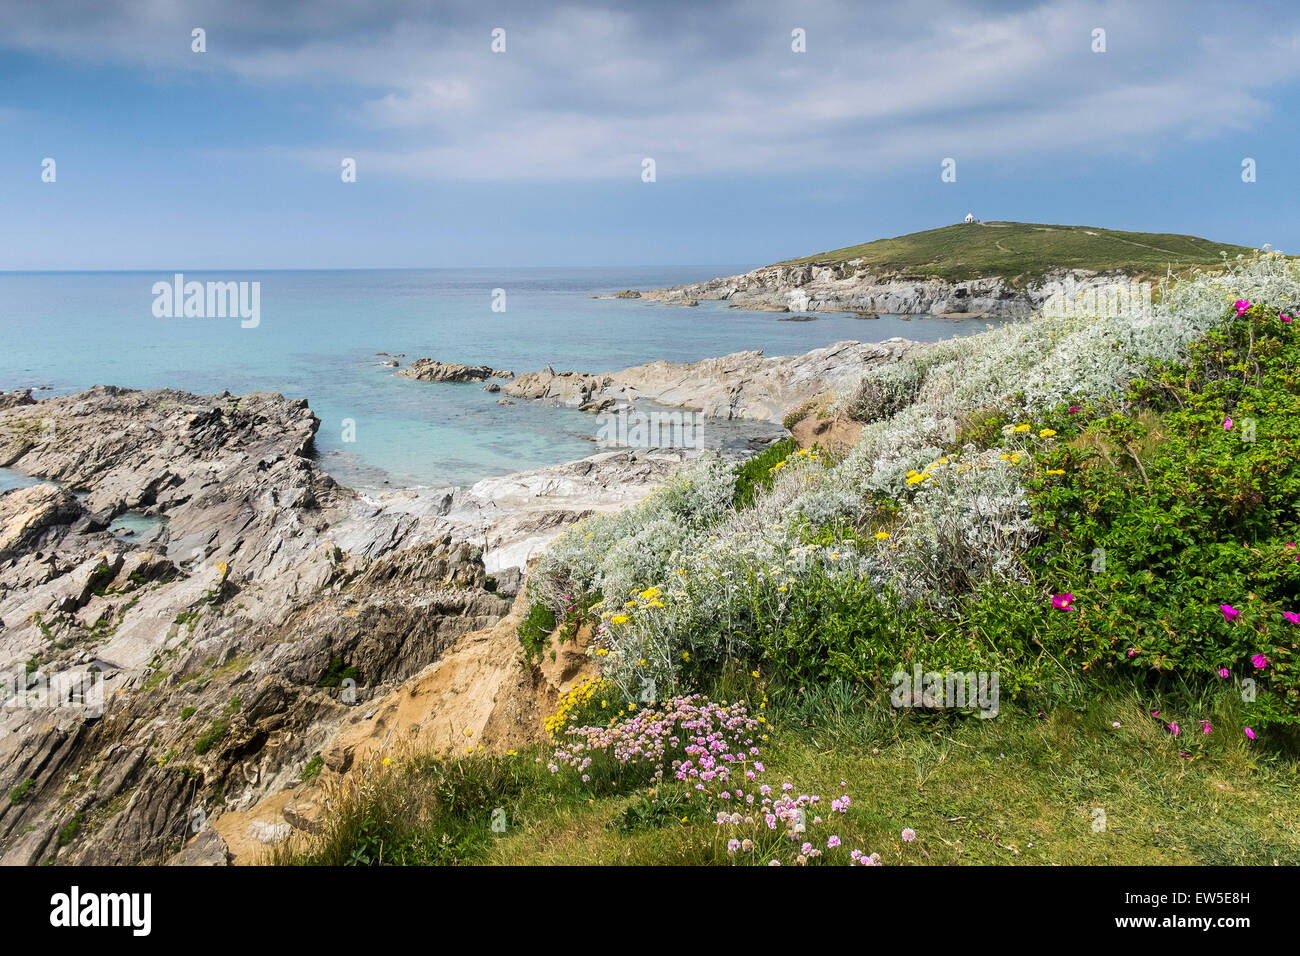 The rugged coastline of Newquay in Cornwall. Stock Photo